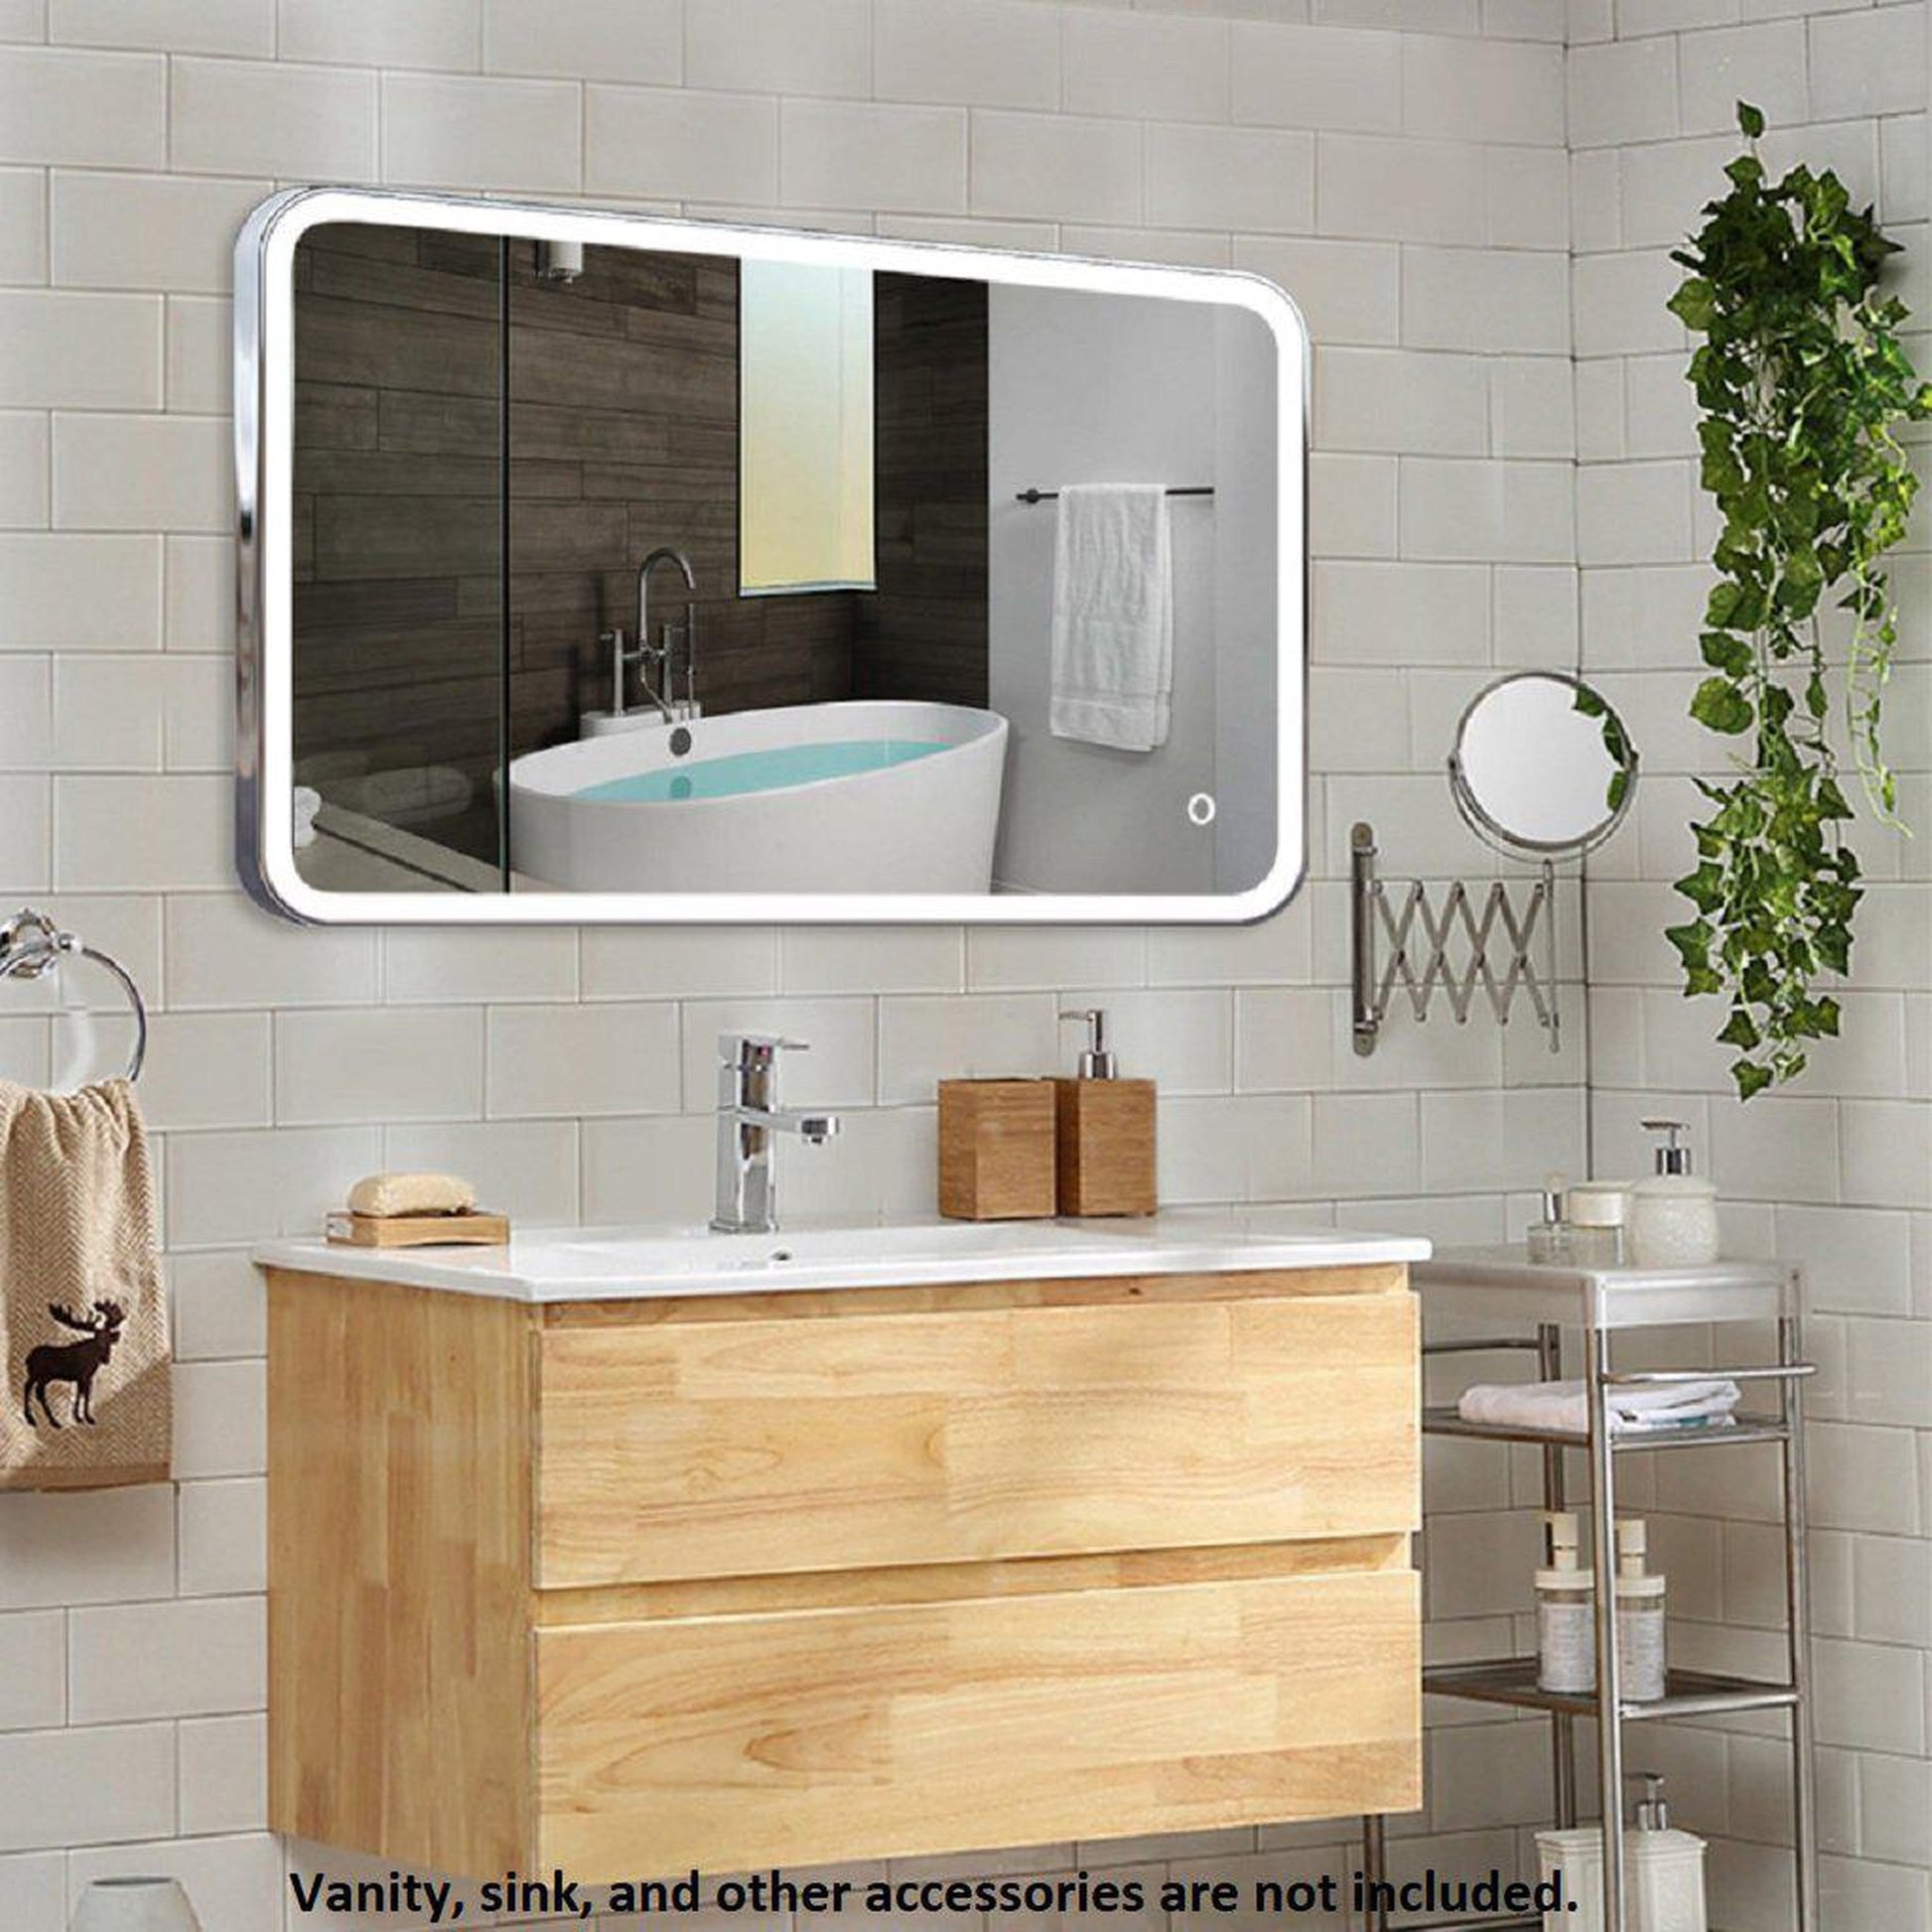 Lighted Impressions Saffron 32.5" x 19.687" Rectangular Framed Wall-Mounted LED Mirror With Touch Sensor